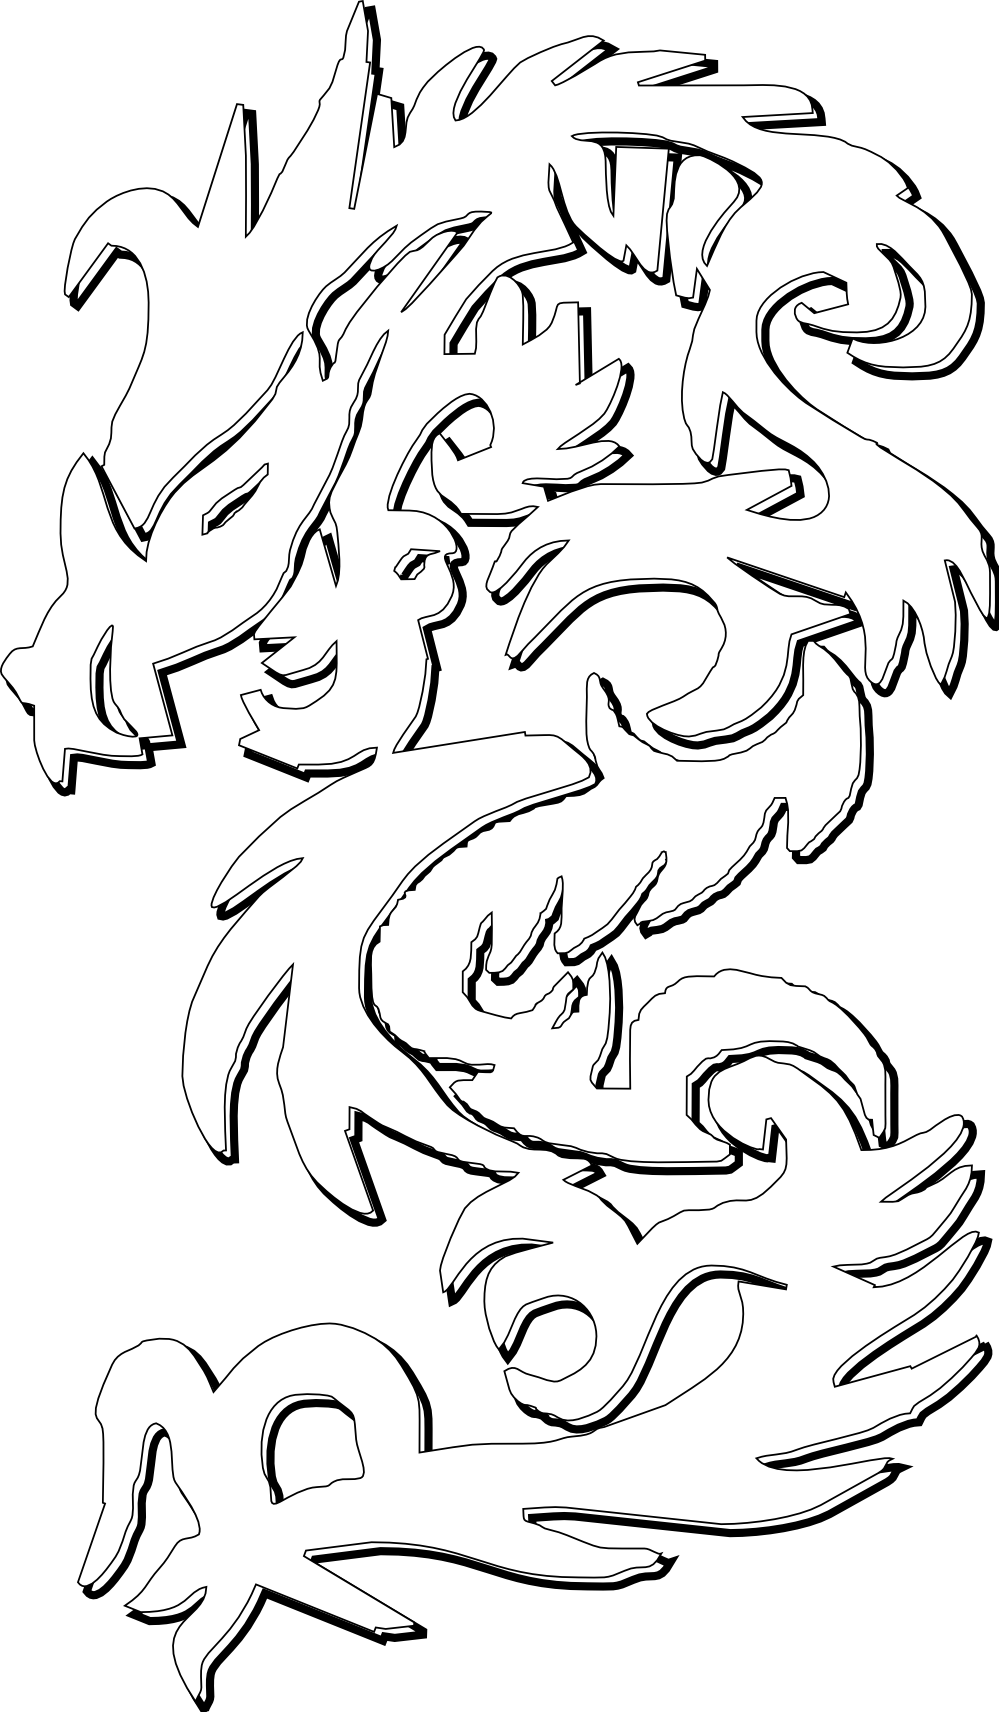 Dragon Images Black And White - Cliparts.co